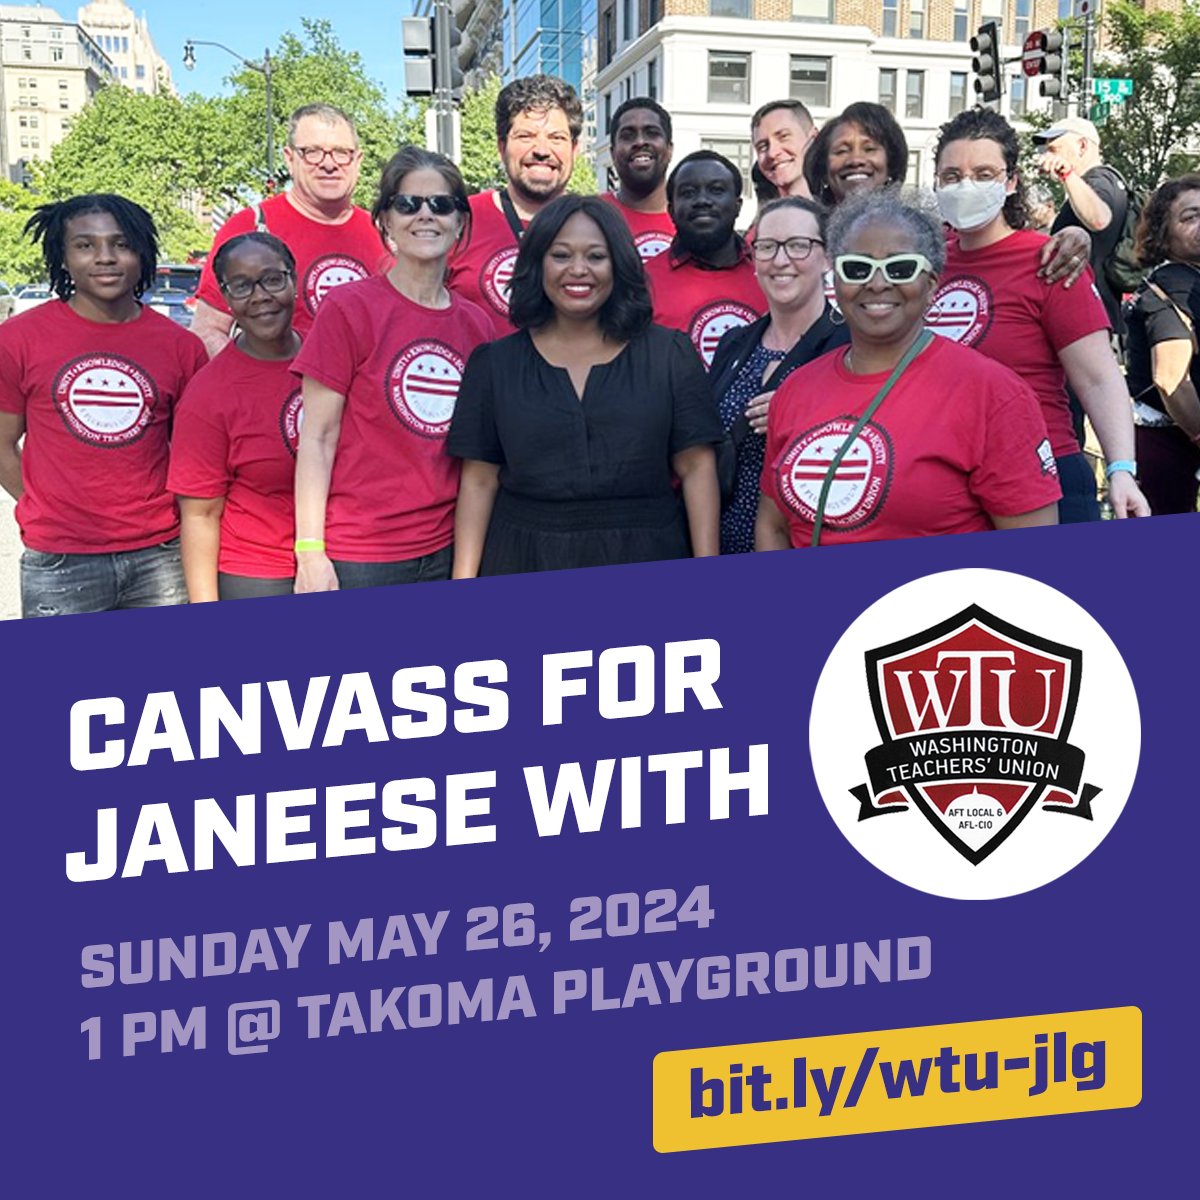 Please come out to canvass for WTU's-endorsed candidate @Janeese4DC for Ward 4 DC City Council on Sunday, May 26th! We hope to see you there! #redfored, #realsolutionsforkids